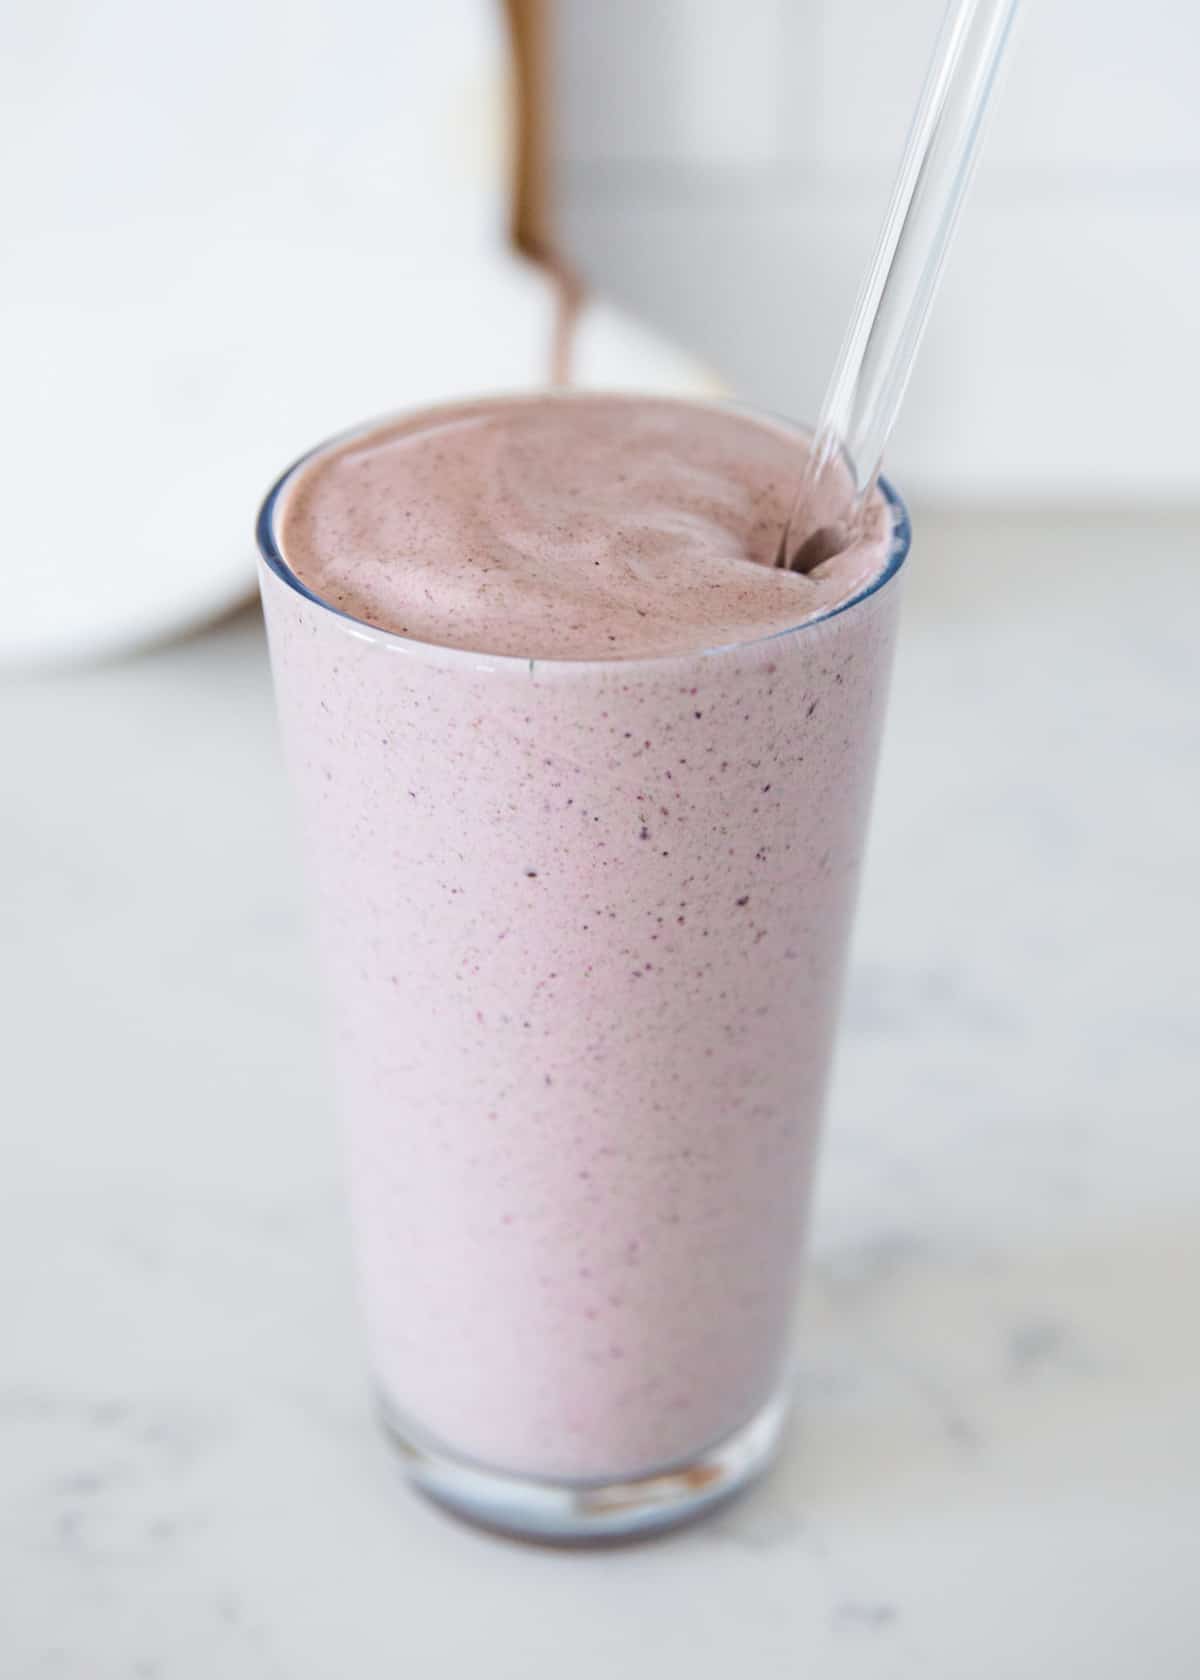 Berry protein smoothie in a glass cup with a straw.